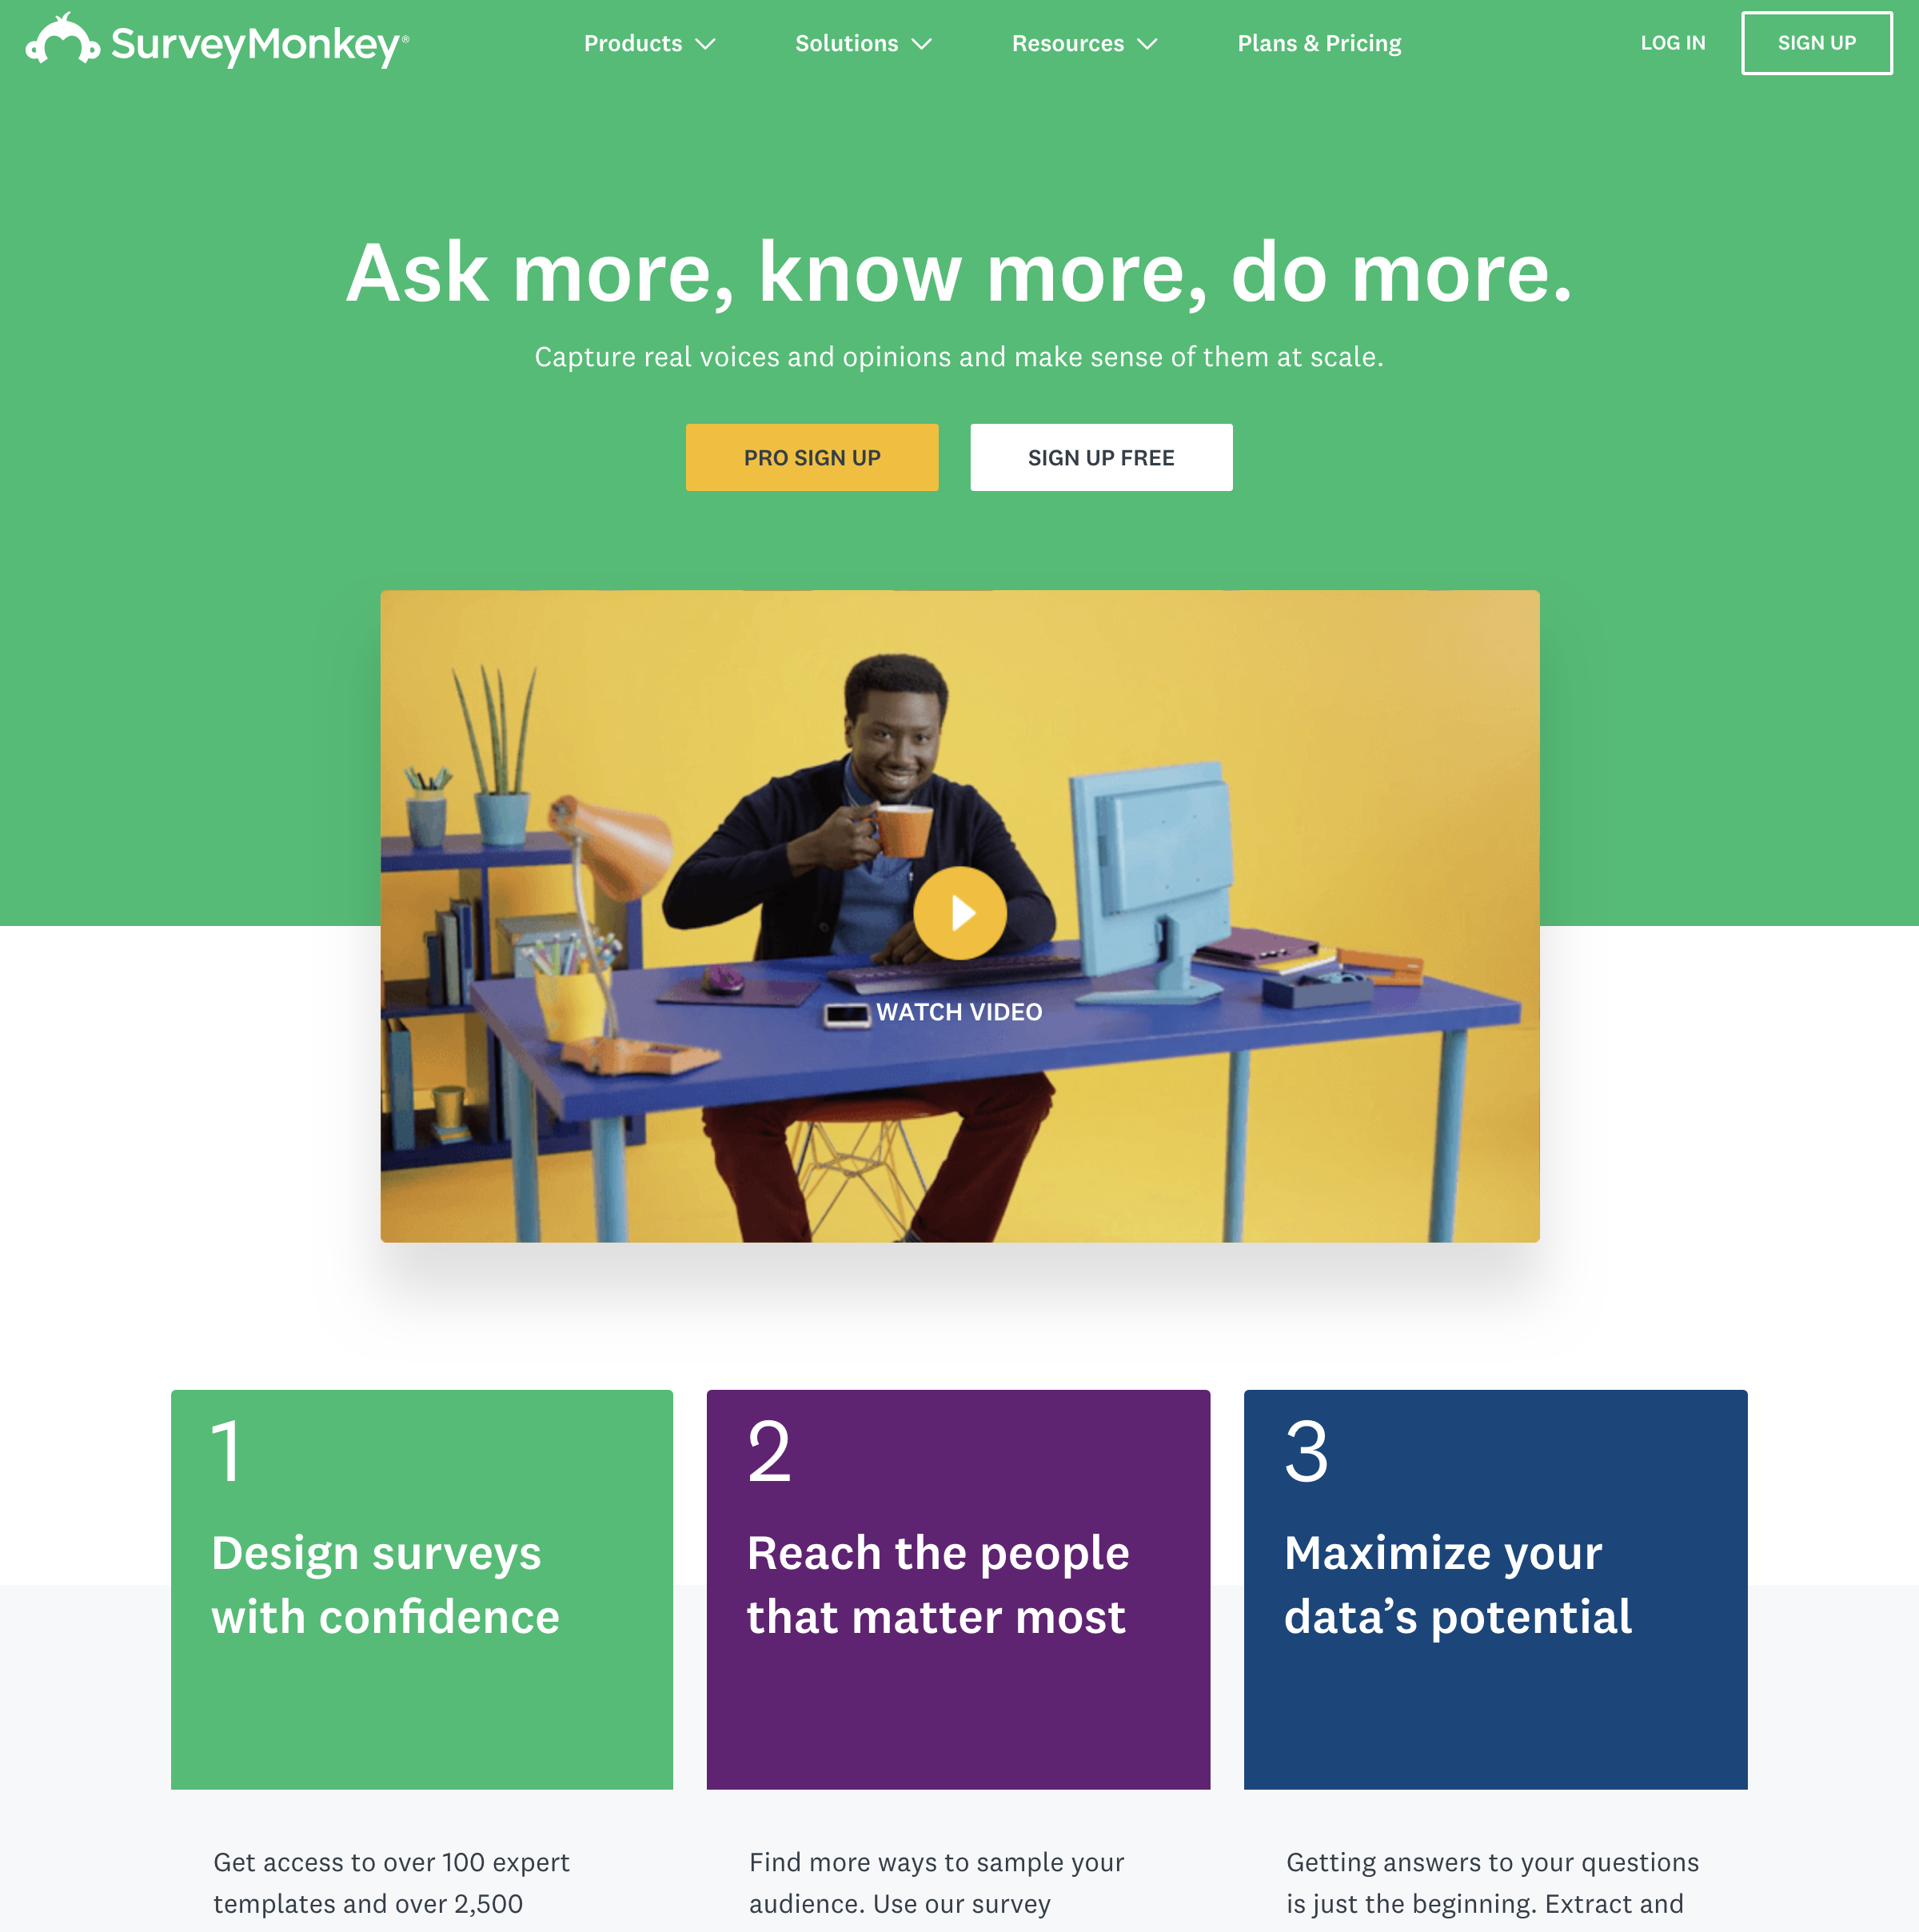 A SurveyMonkey page in English with a simple and similar aesthetic